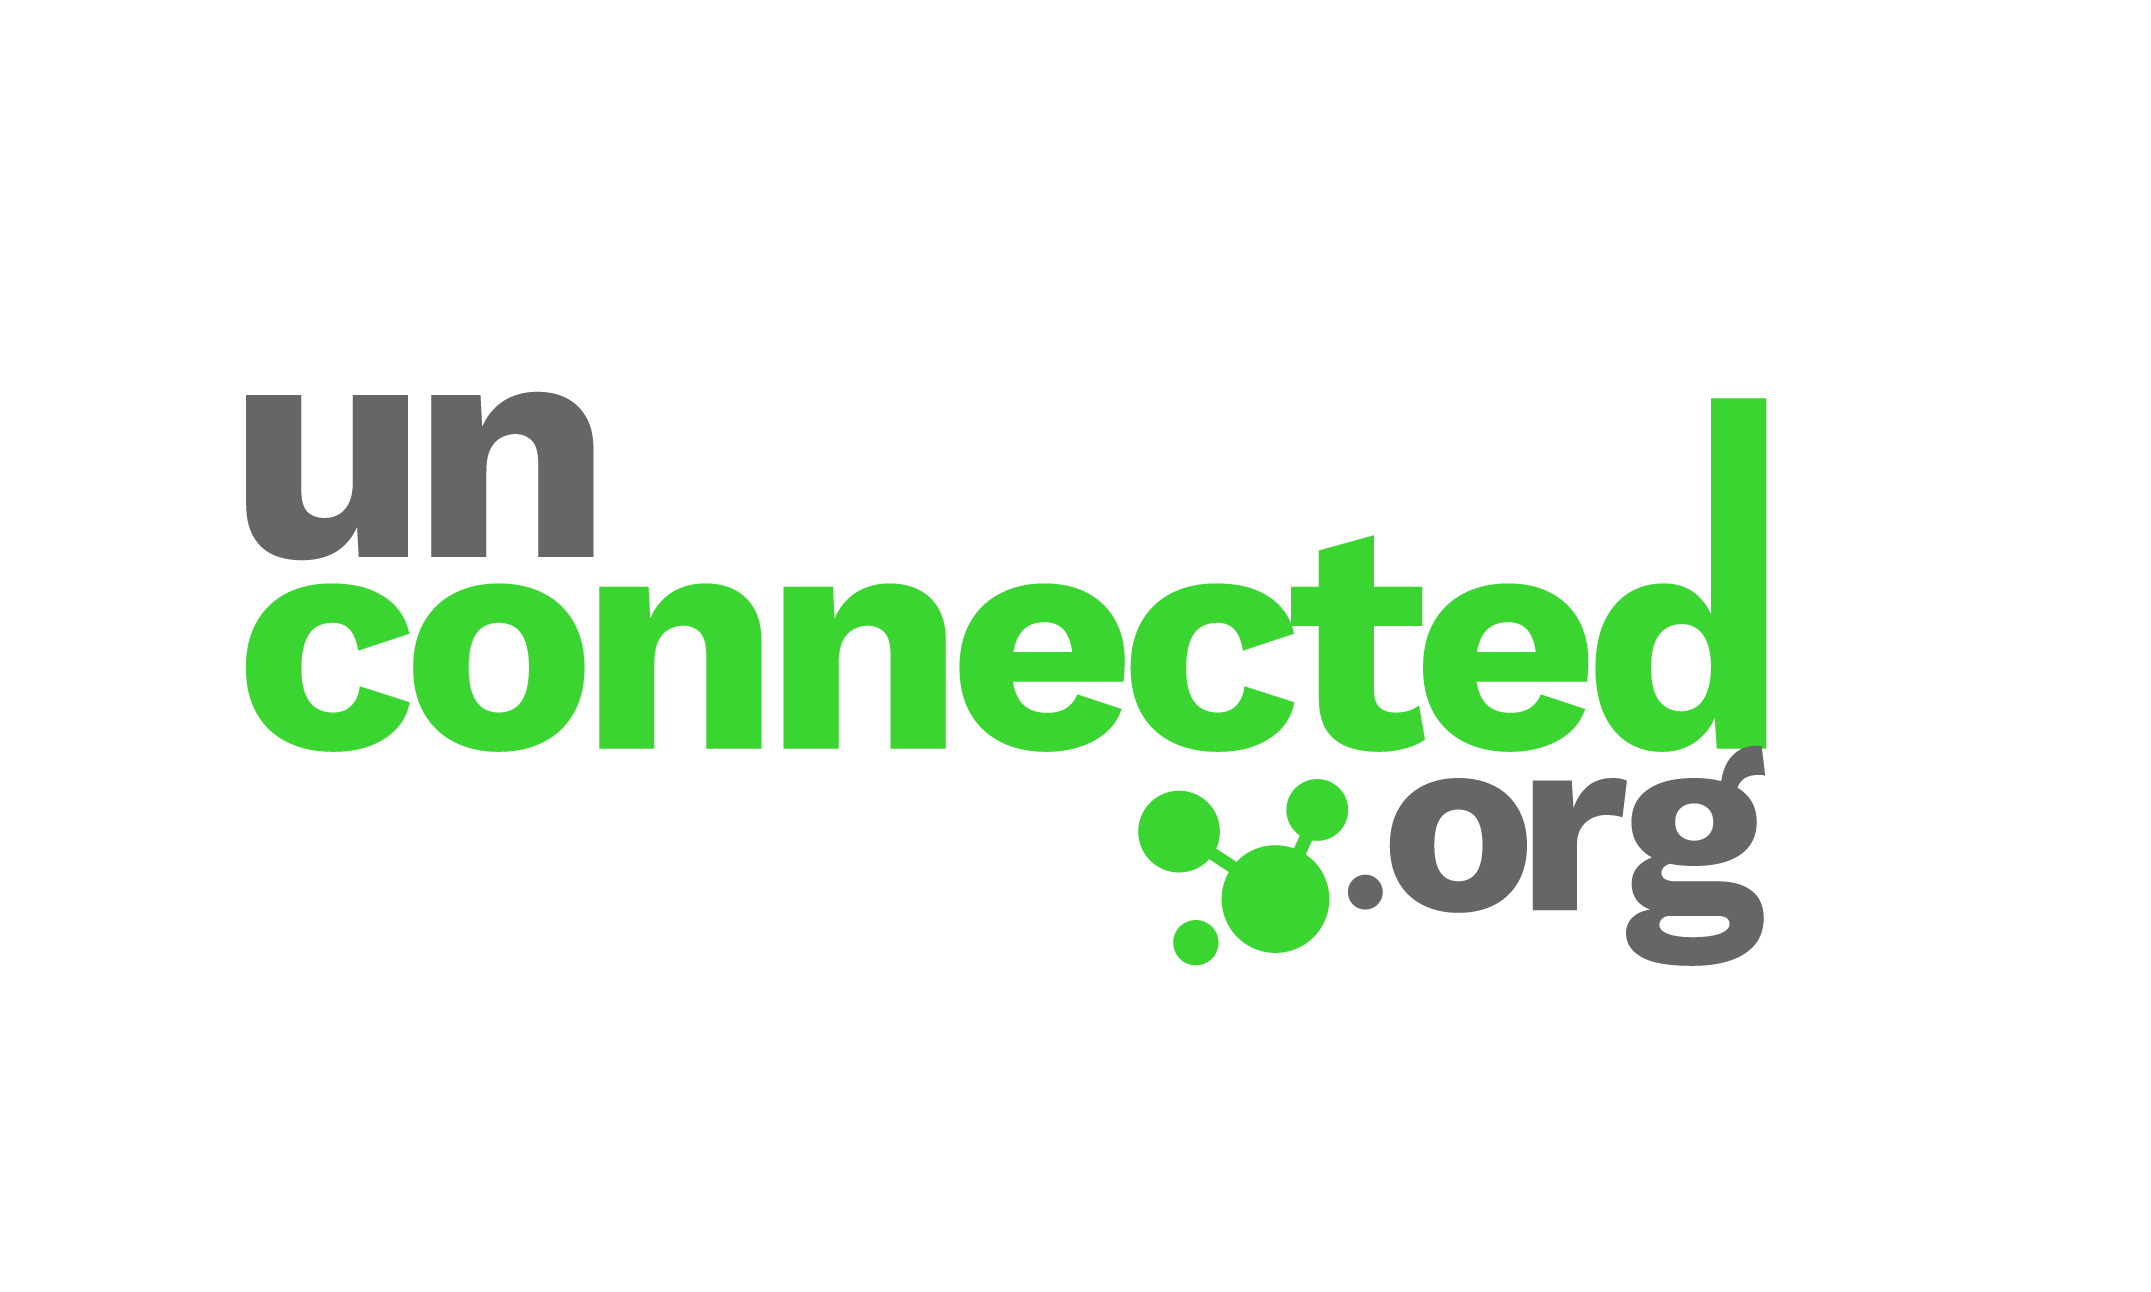 The Unconnected Foundation logo